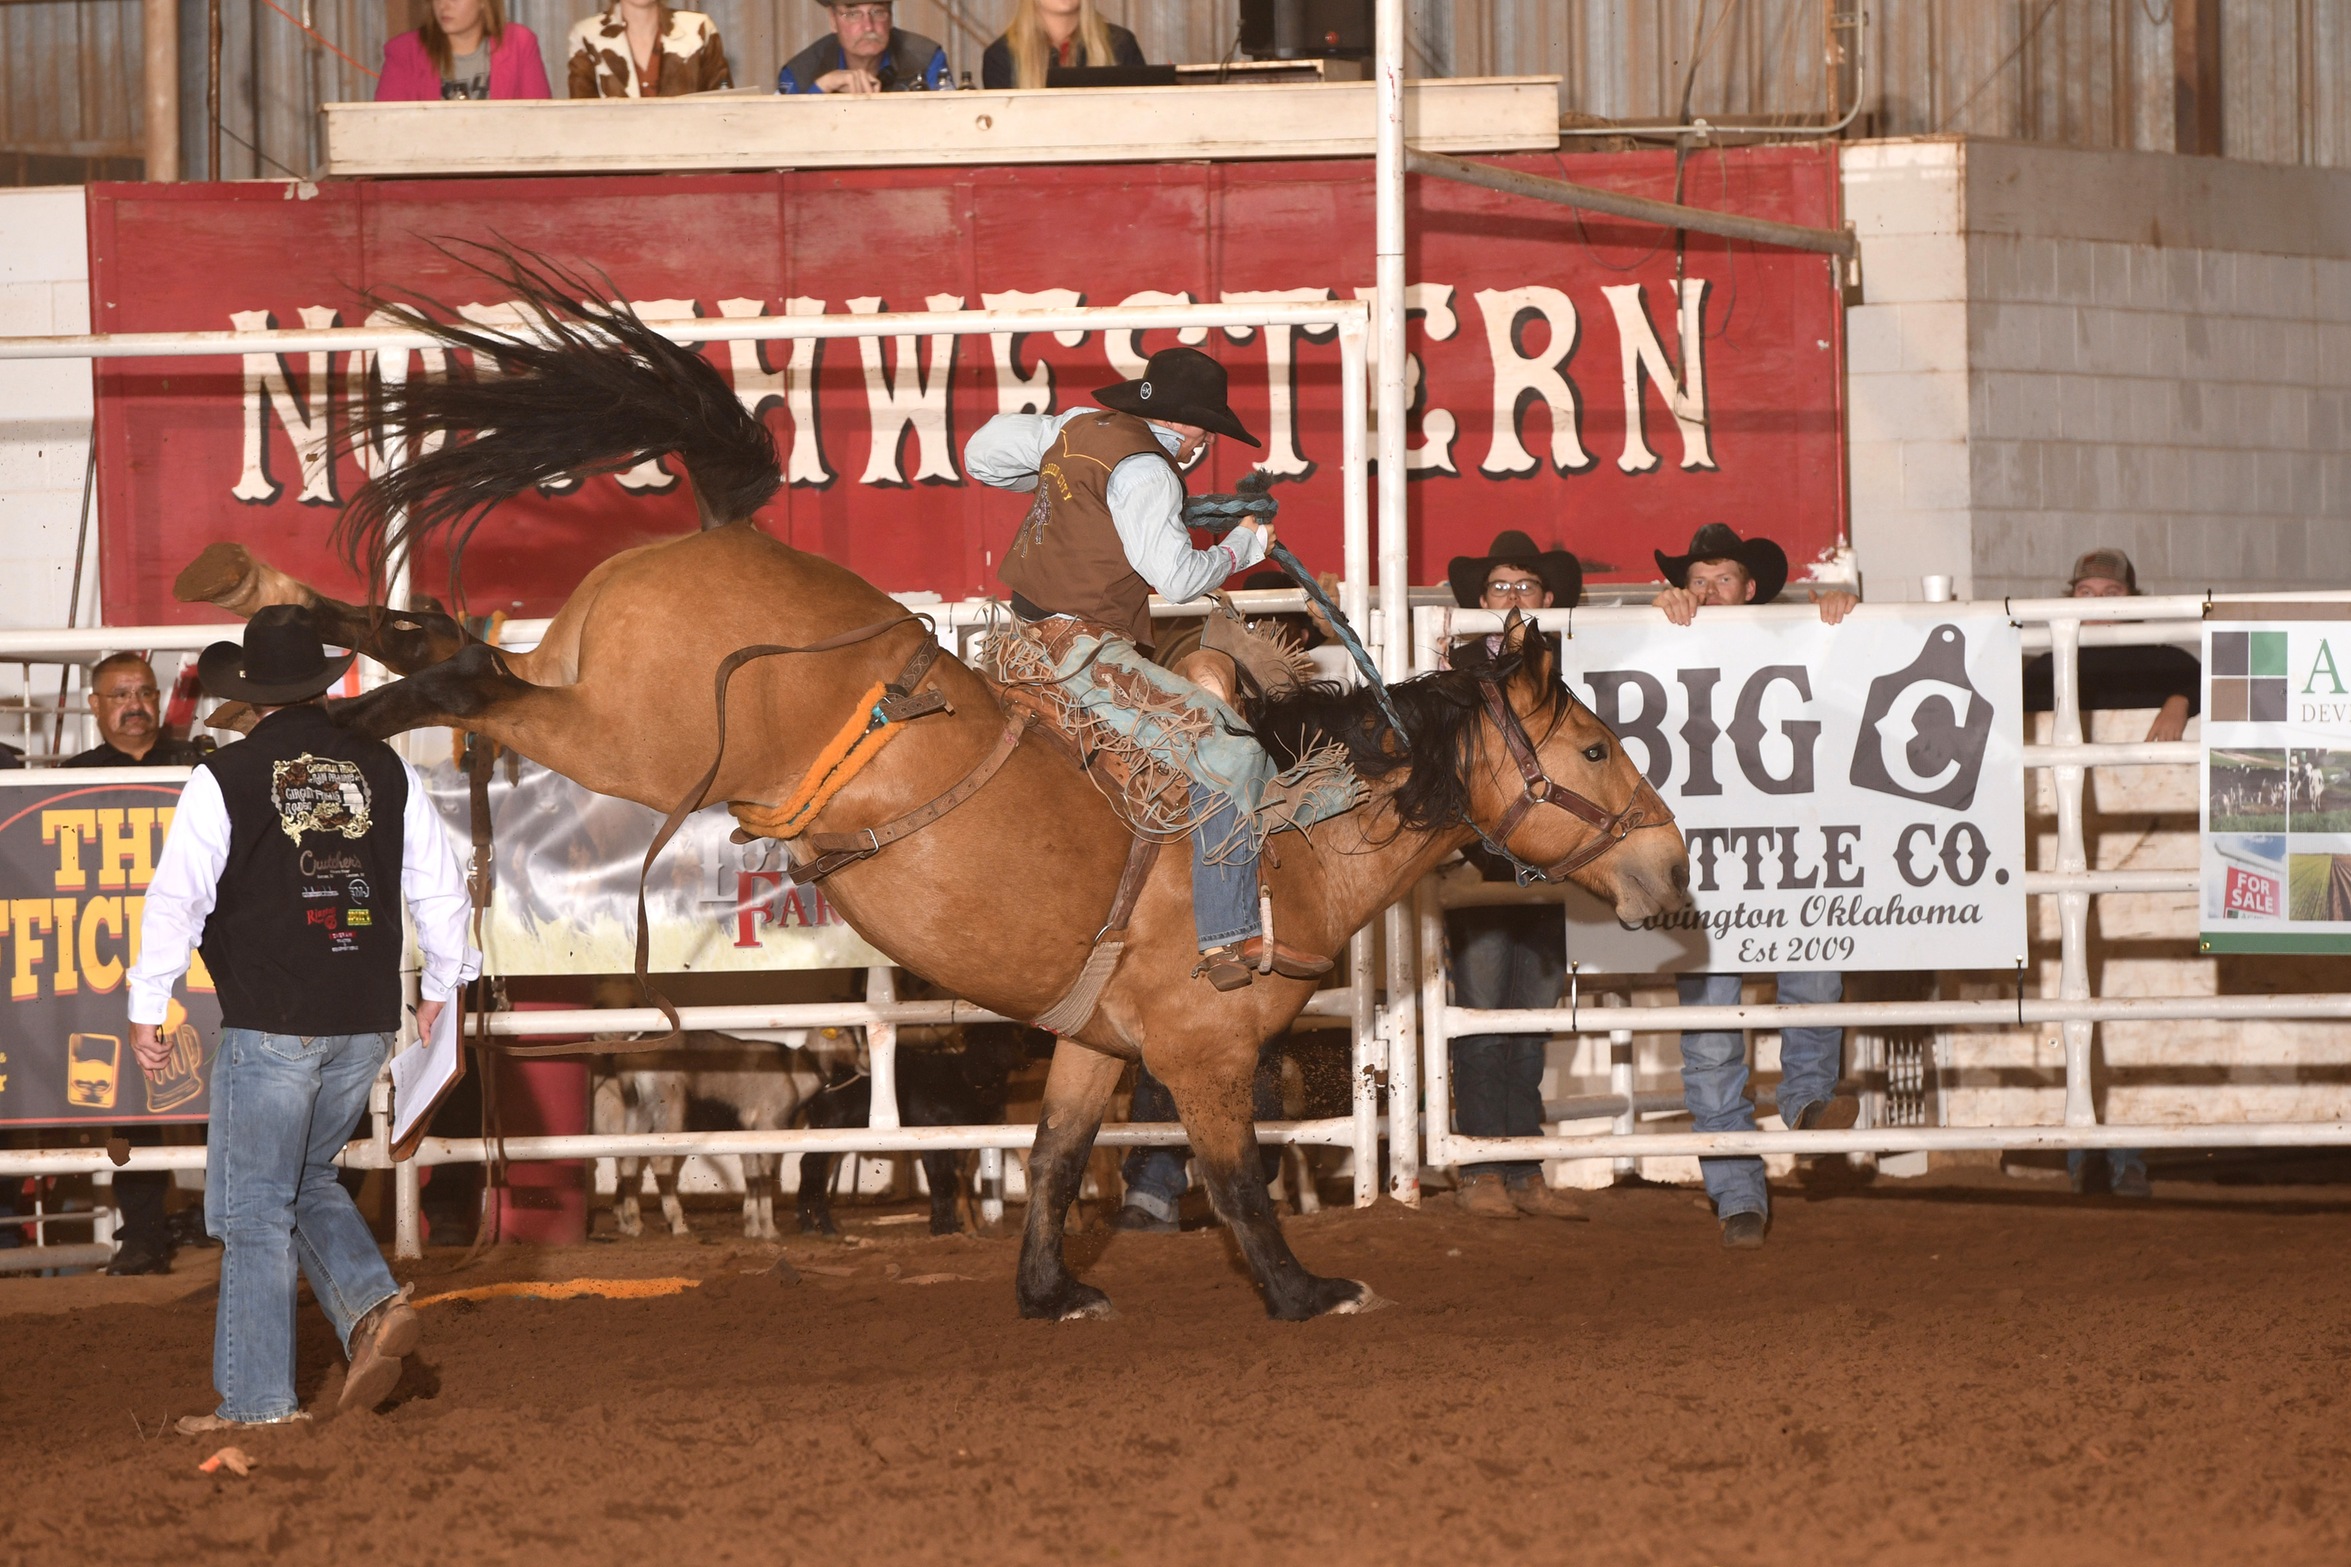 Broncbuster men's rodeo with a strong showing at Northwestern Oklahoma State